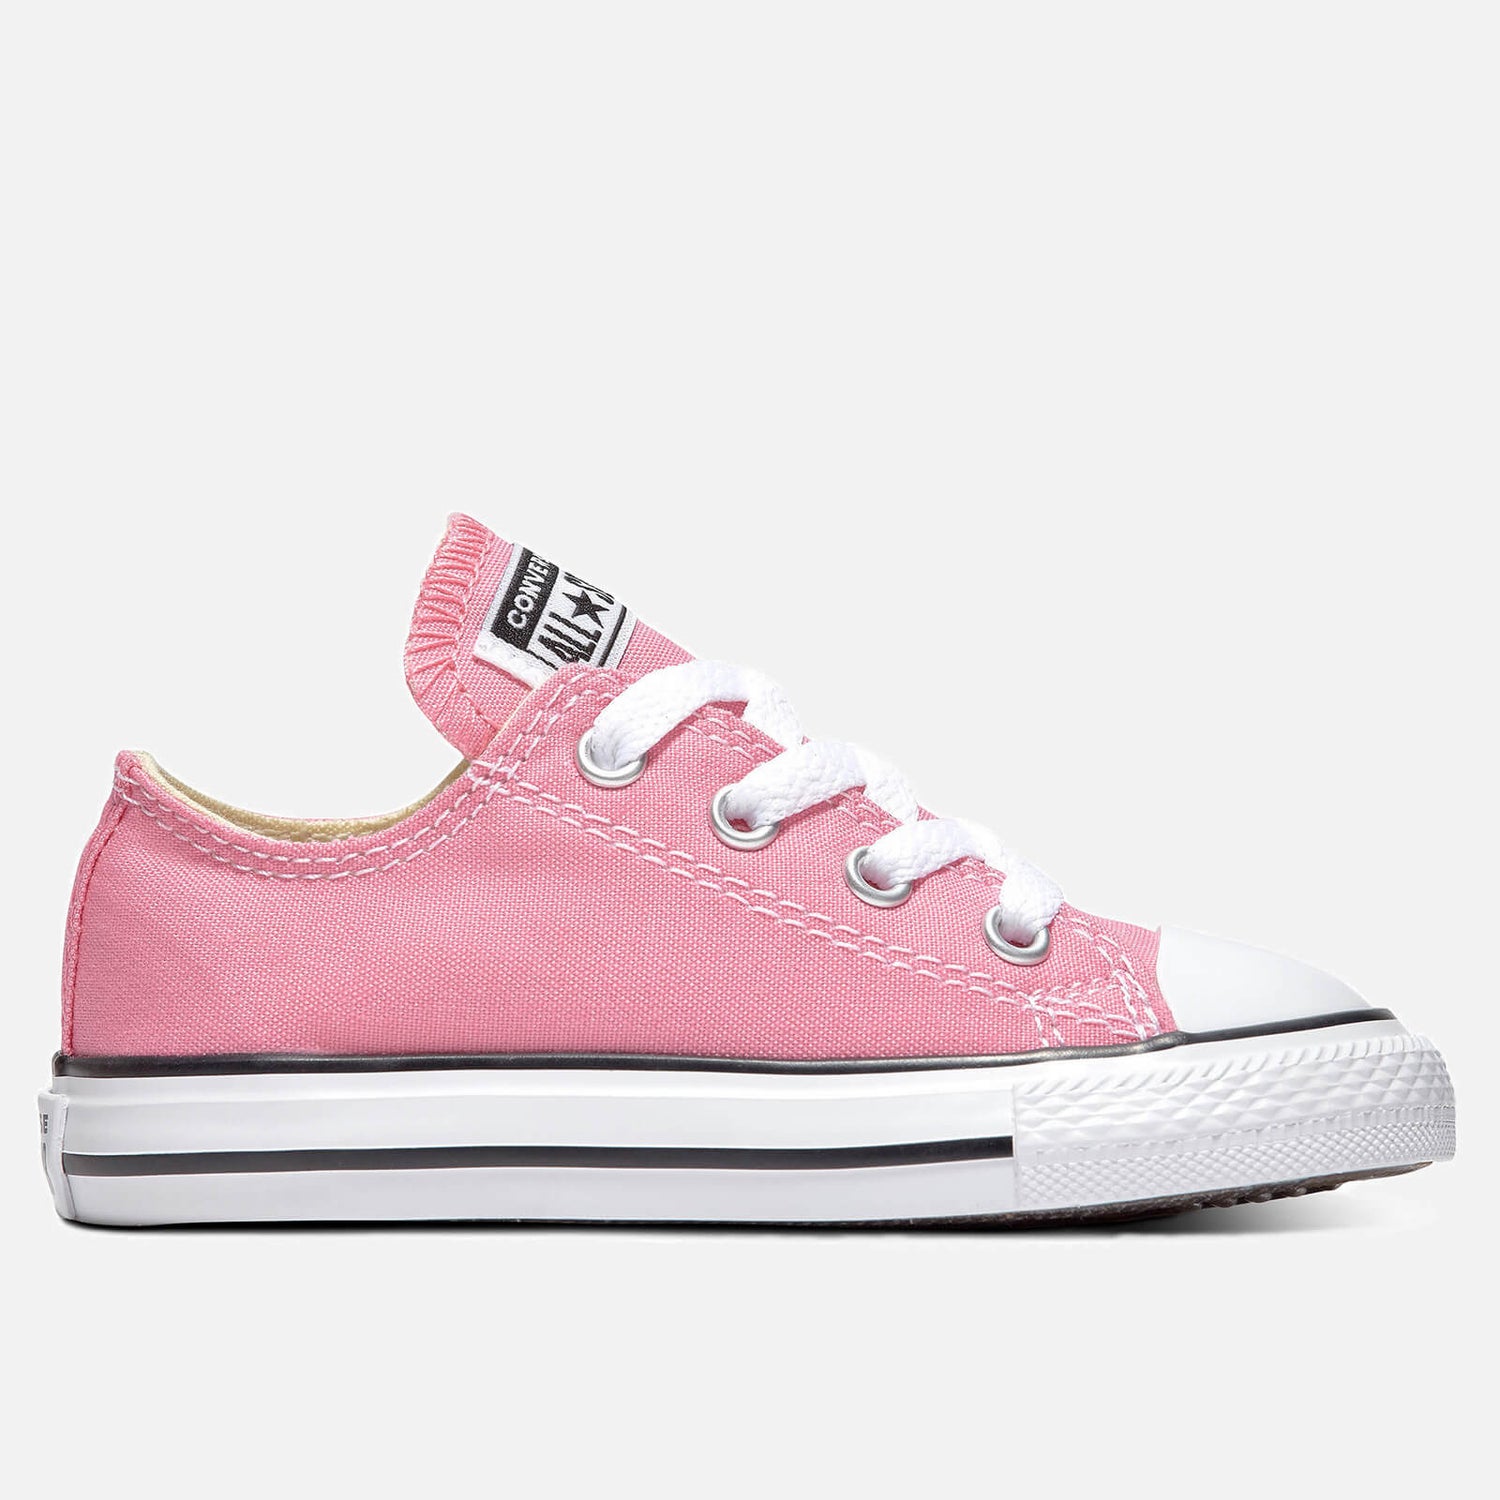 Converse Toddlers' Chuck Taylor All Star Ox Trainers - Pink - UK 4 Baby